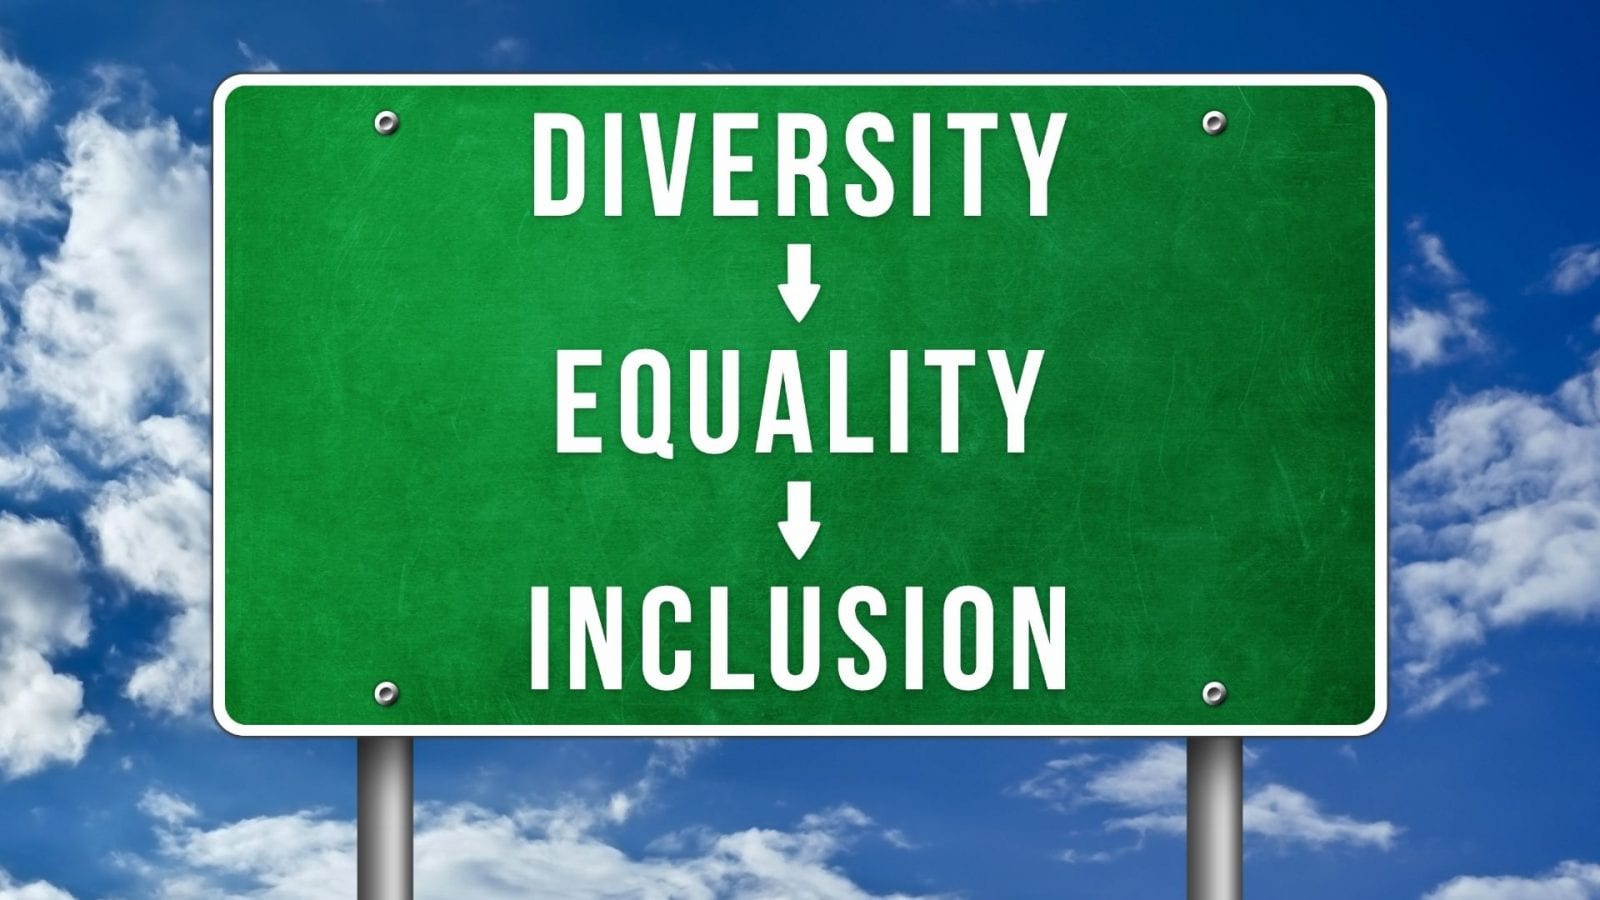 What Does Inclusion Mean